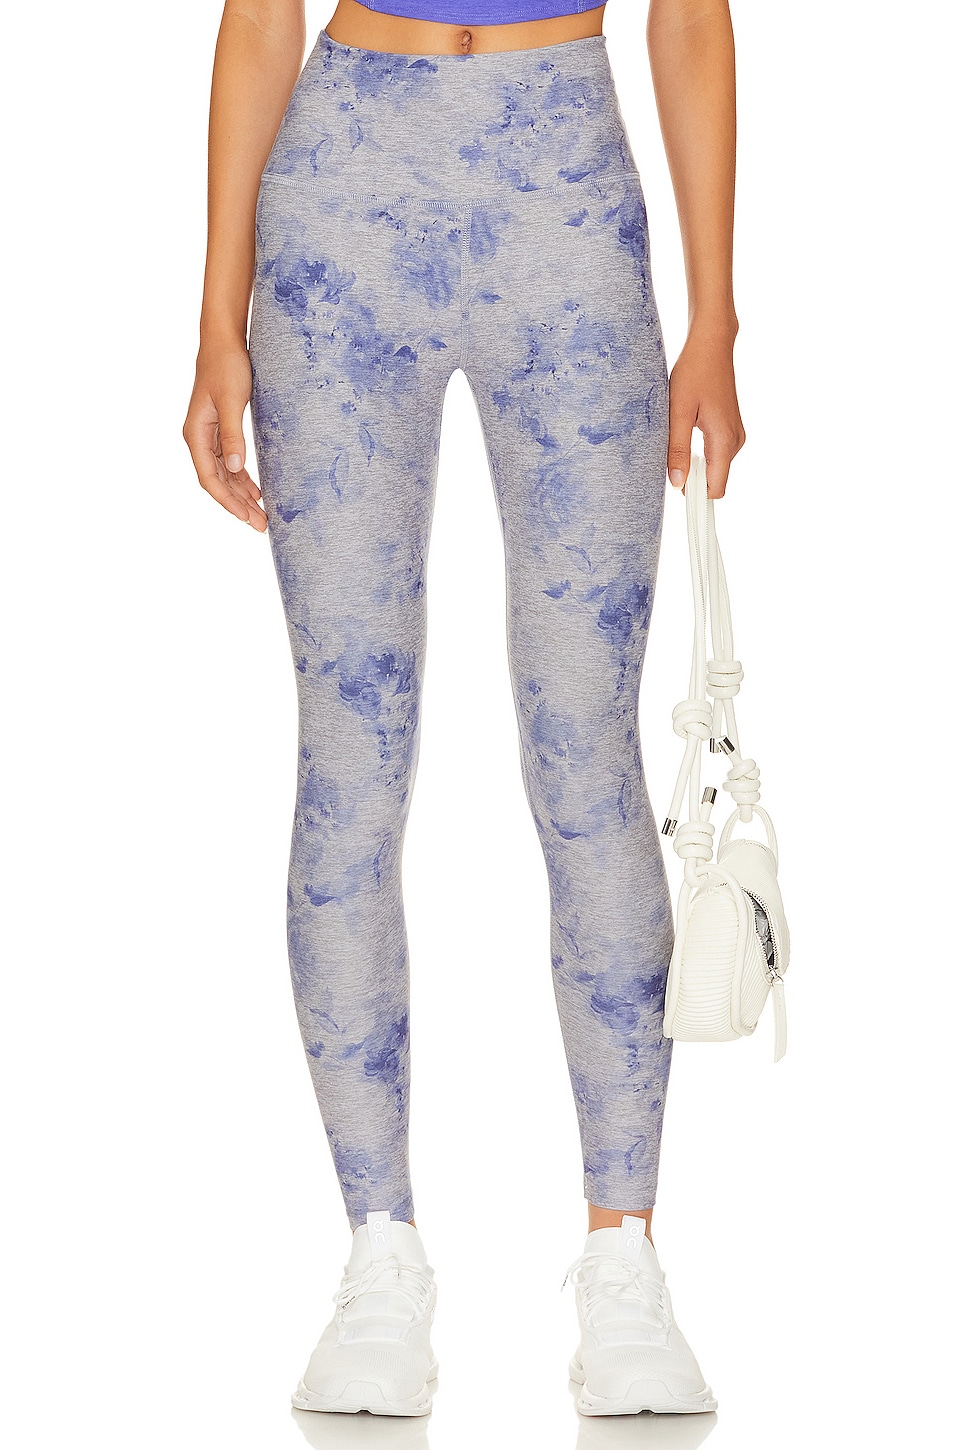 Beyond Yoga Caught In The Midi Printed High-Wasted Legging